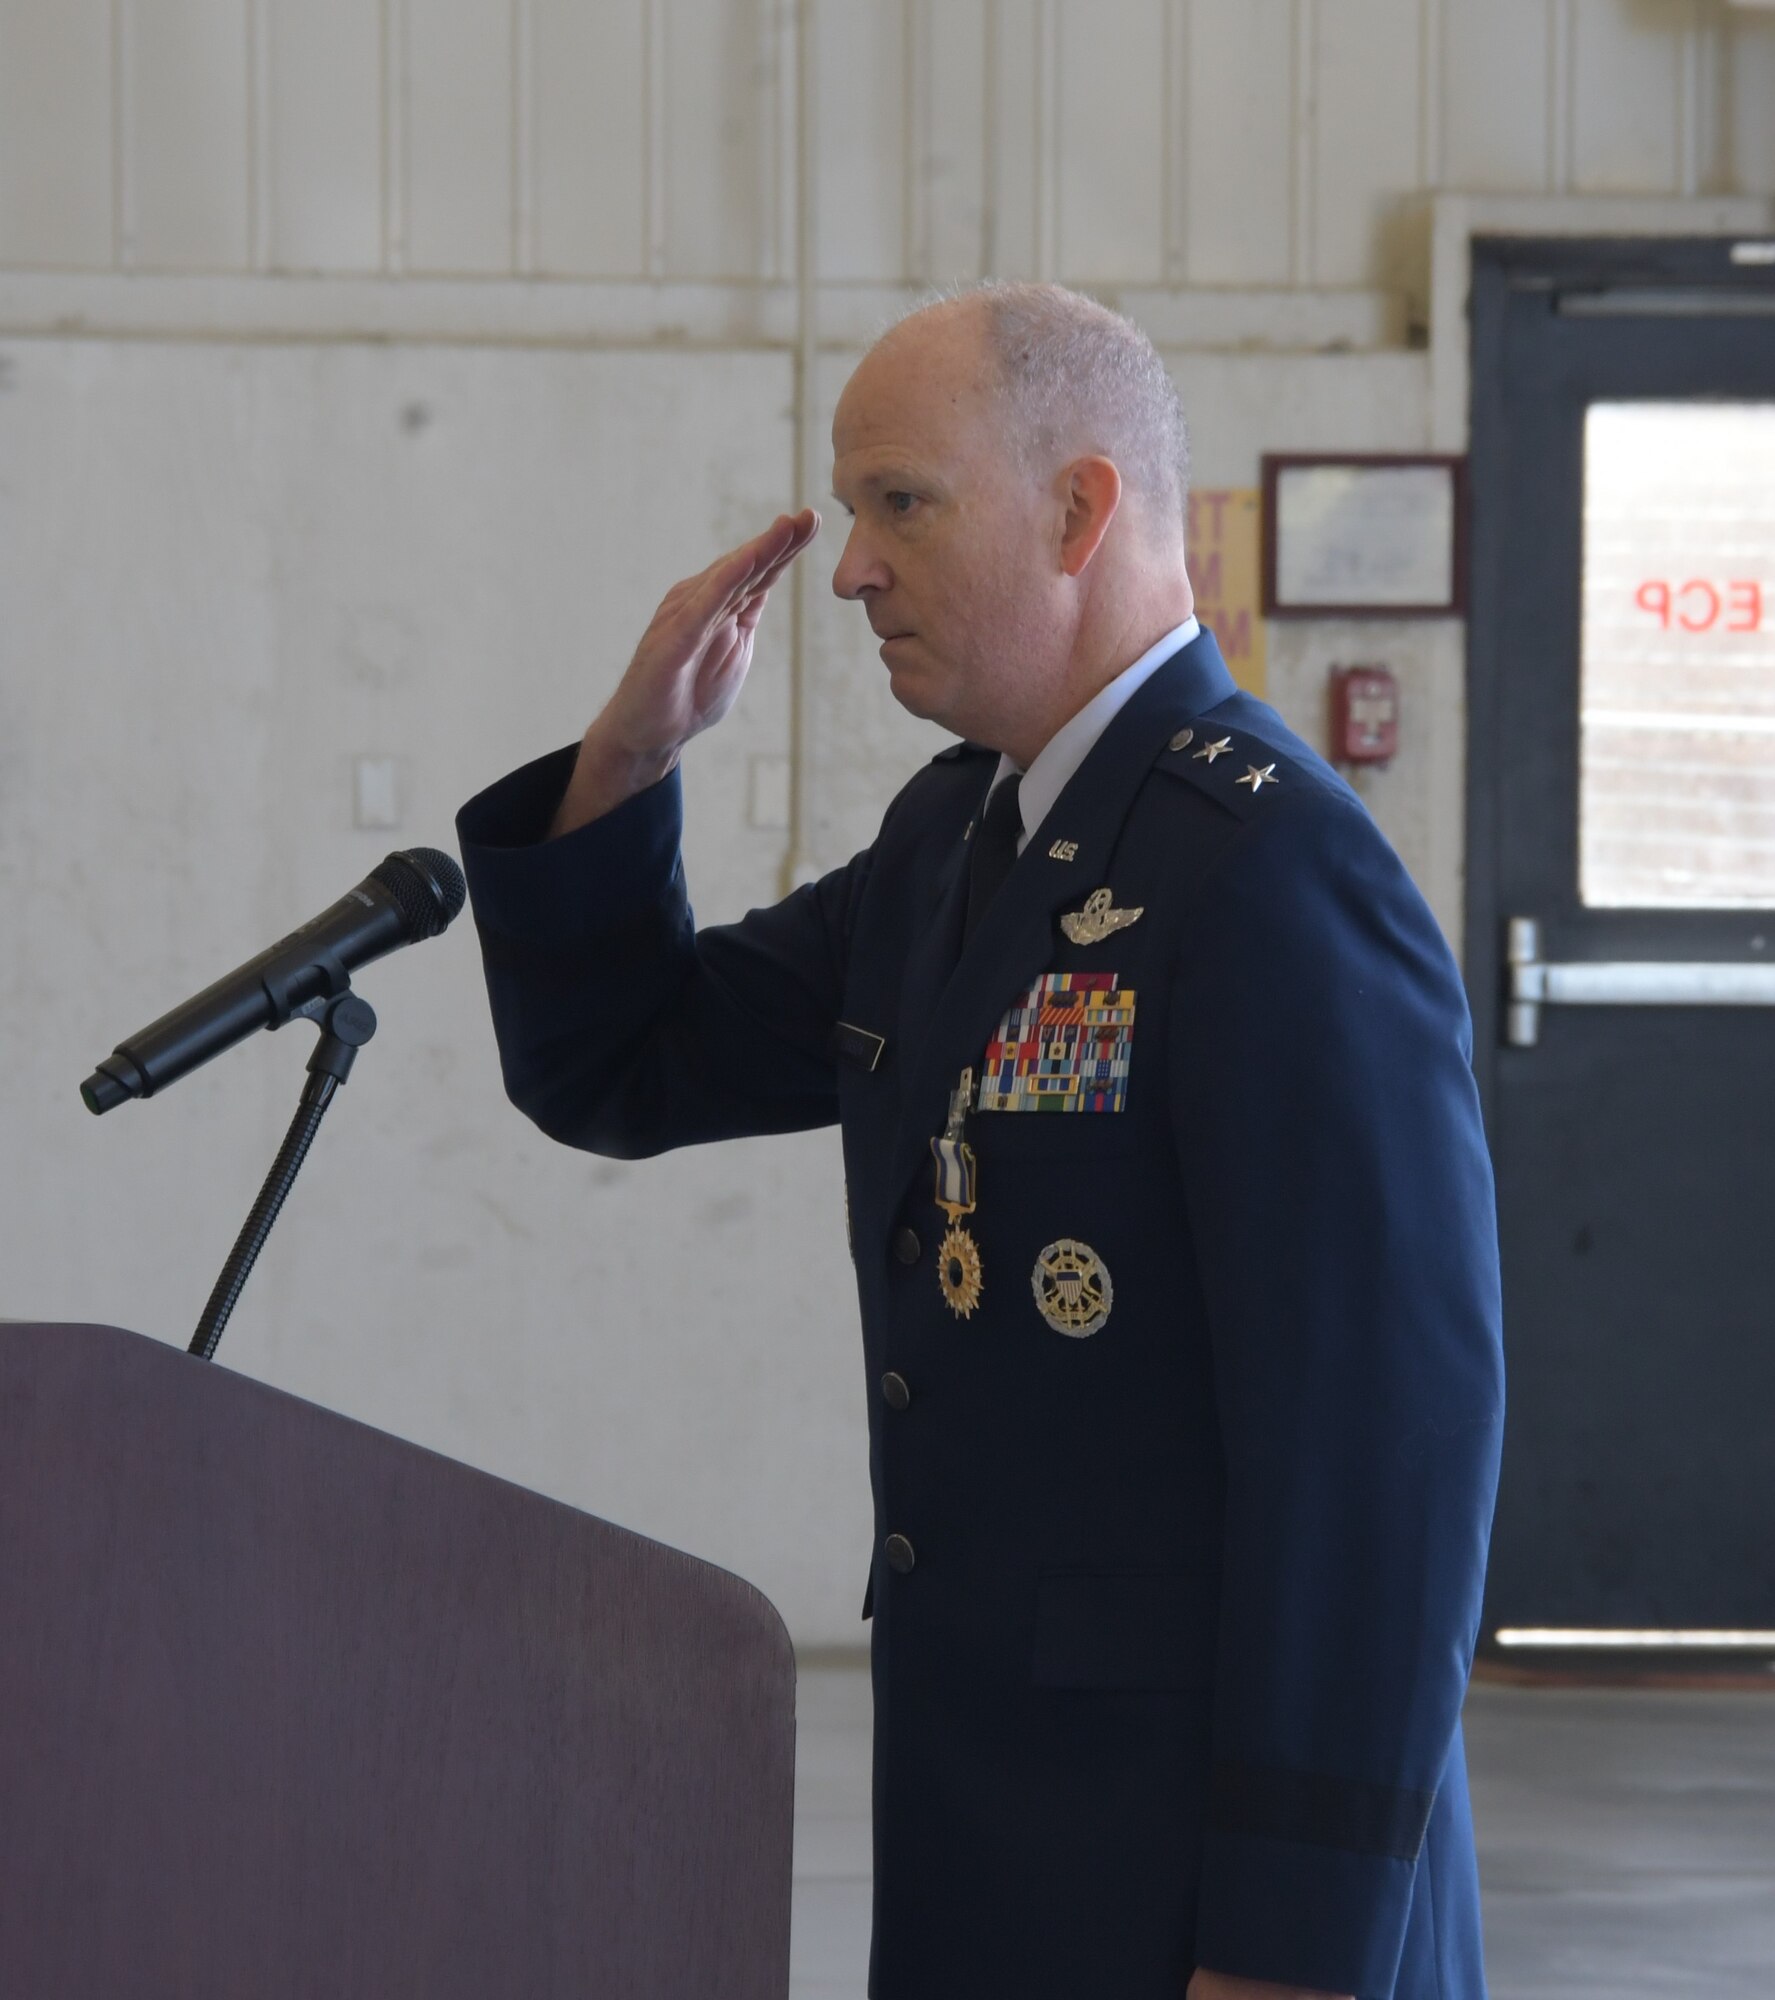 Outgoing commander, Maj. Gen. Bret C. Larson salutes the Airmen of 22nd Air Force during the 22nd Air Force change of command ceremony at Dobbins Air Reserve Base, Georgia, April 2, 2023.